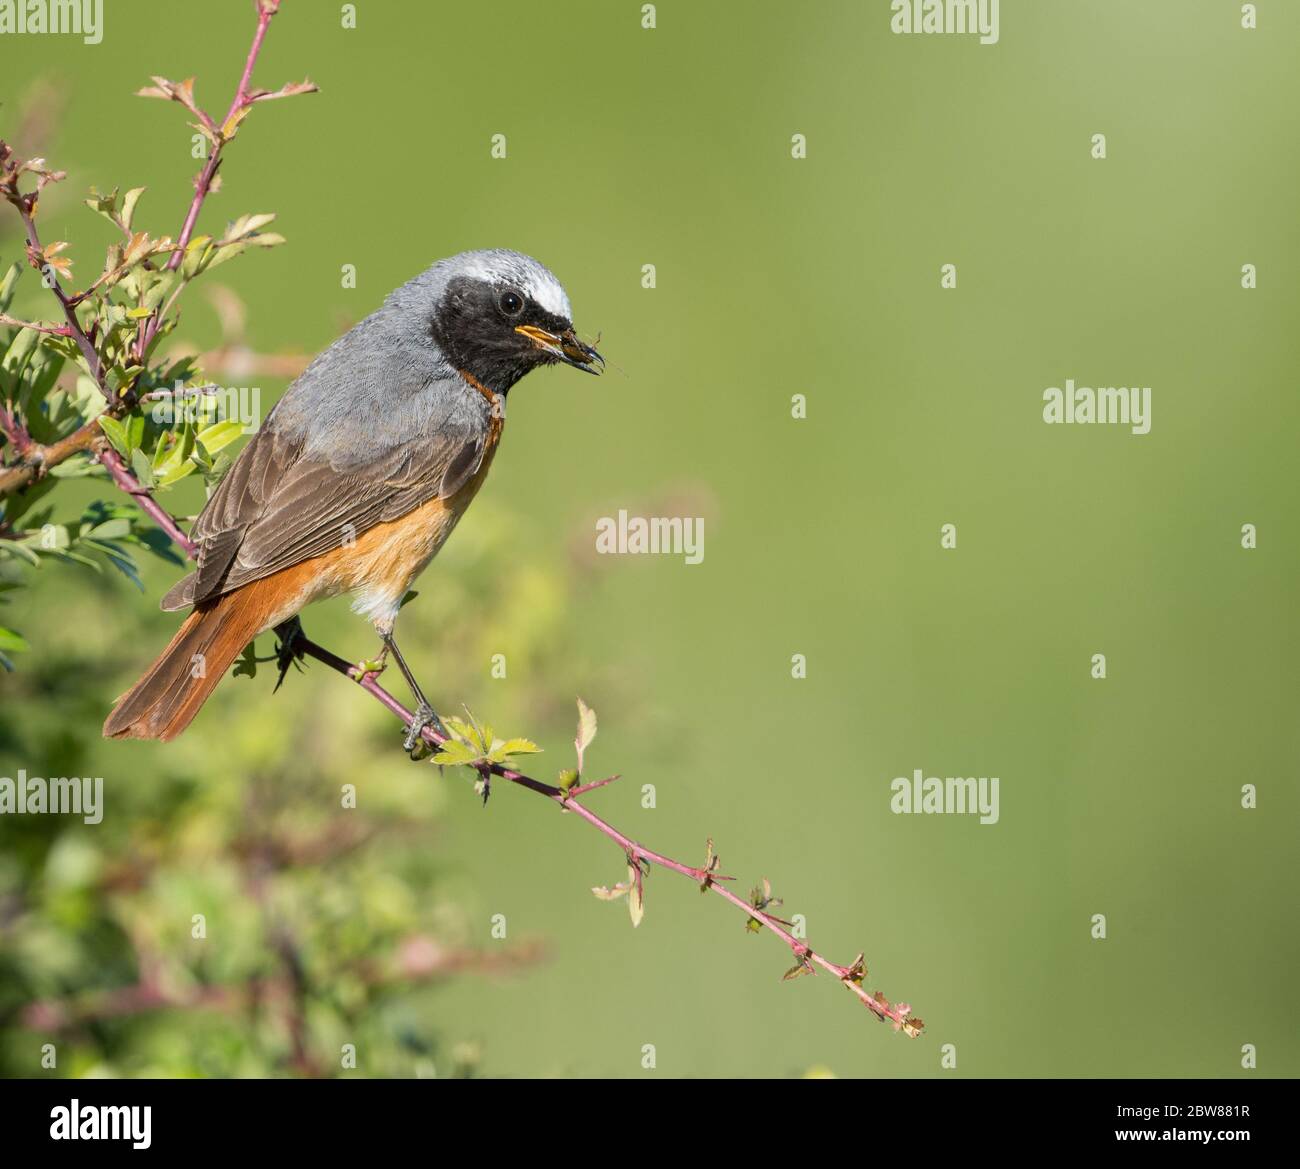 A male Common Redstart (Phoenicurus phoenicurus) in breeding plumage perched with food in its beak. Taken on Cleeve Hill, Gloucestershire, UK. Stock Photo